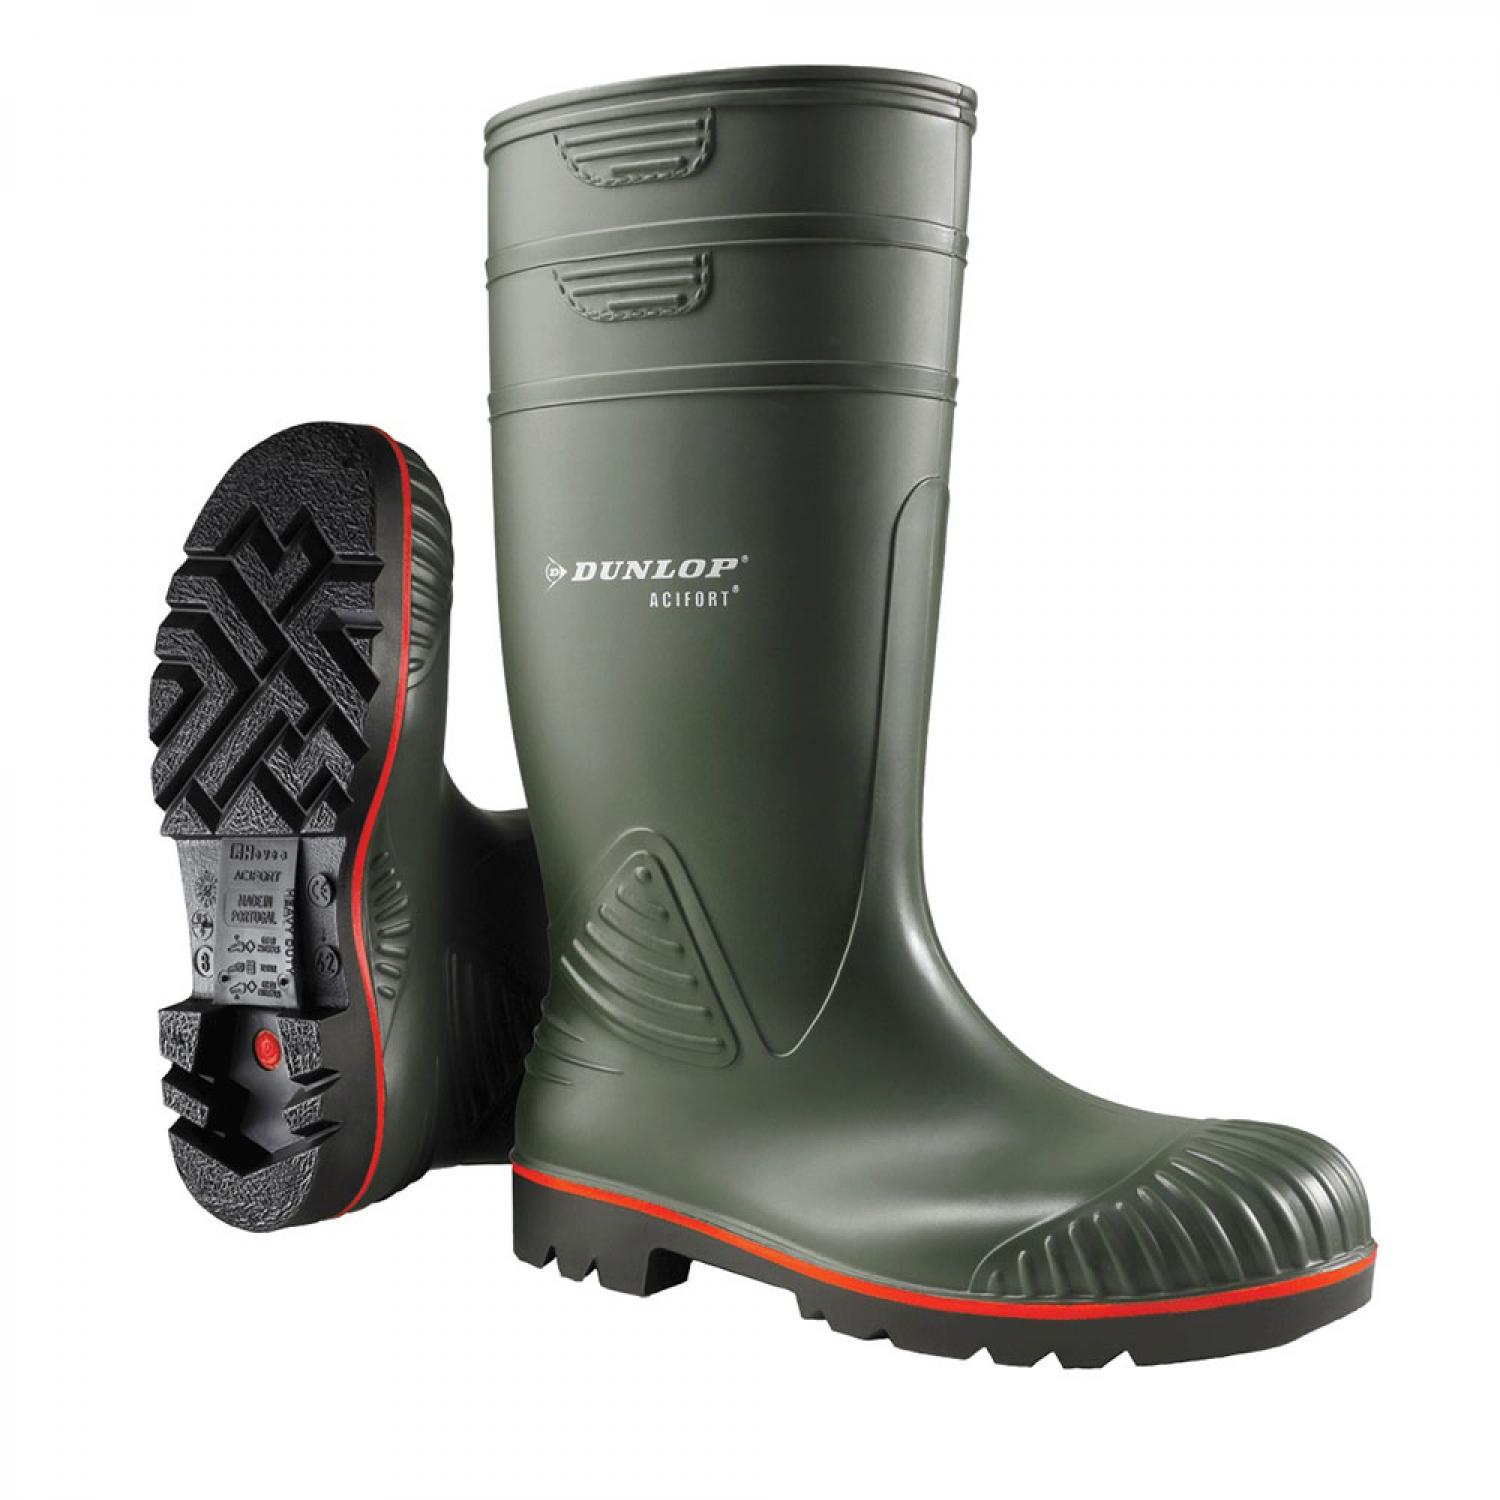 Buy Dunlop Acifort Safety Wellington from Fane Valley Stores ...